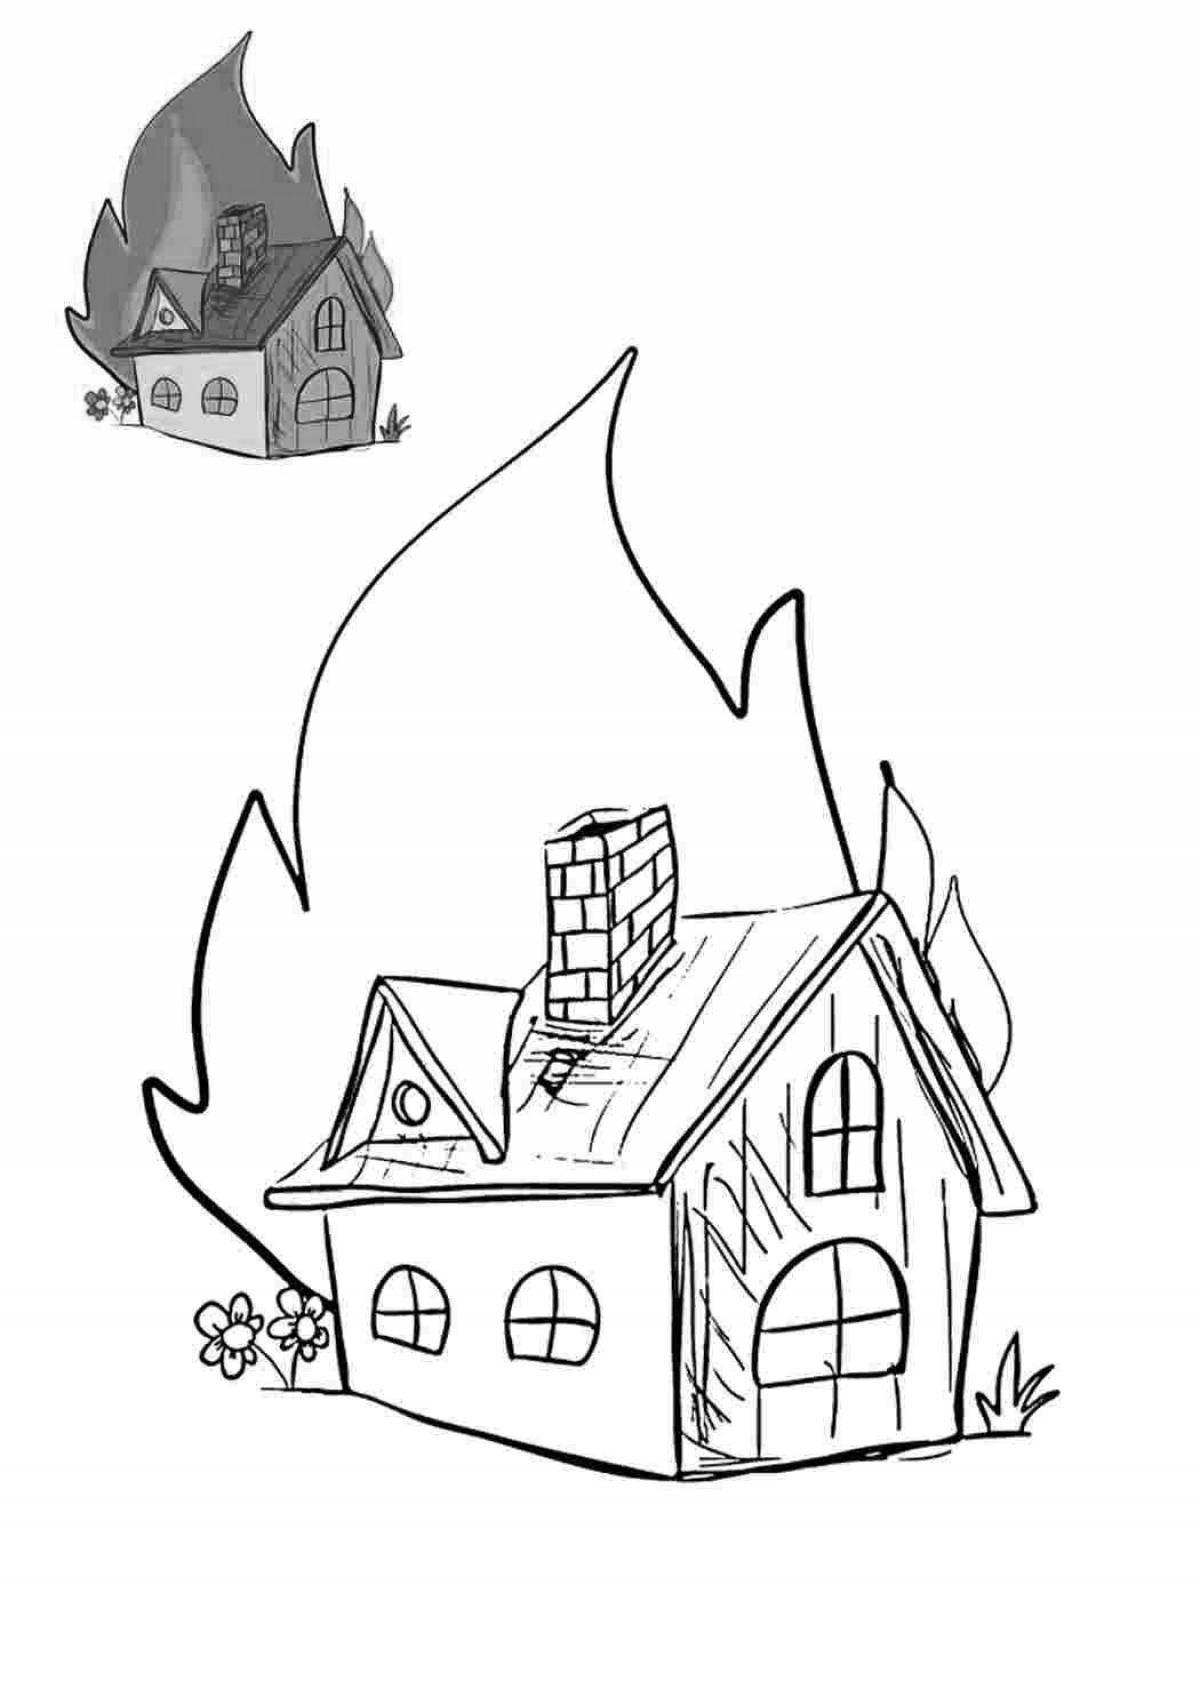 Cute burning house coloring book for kids